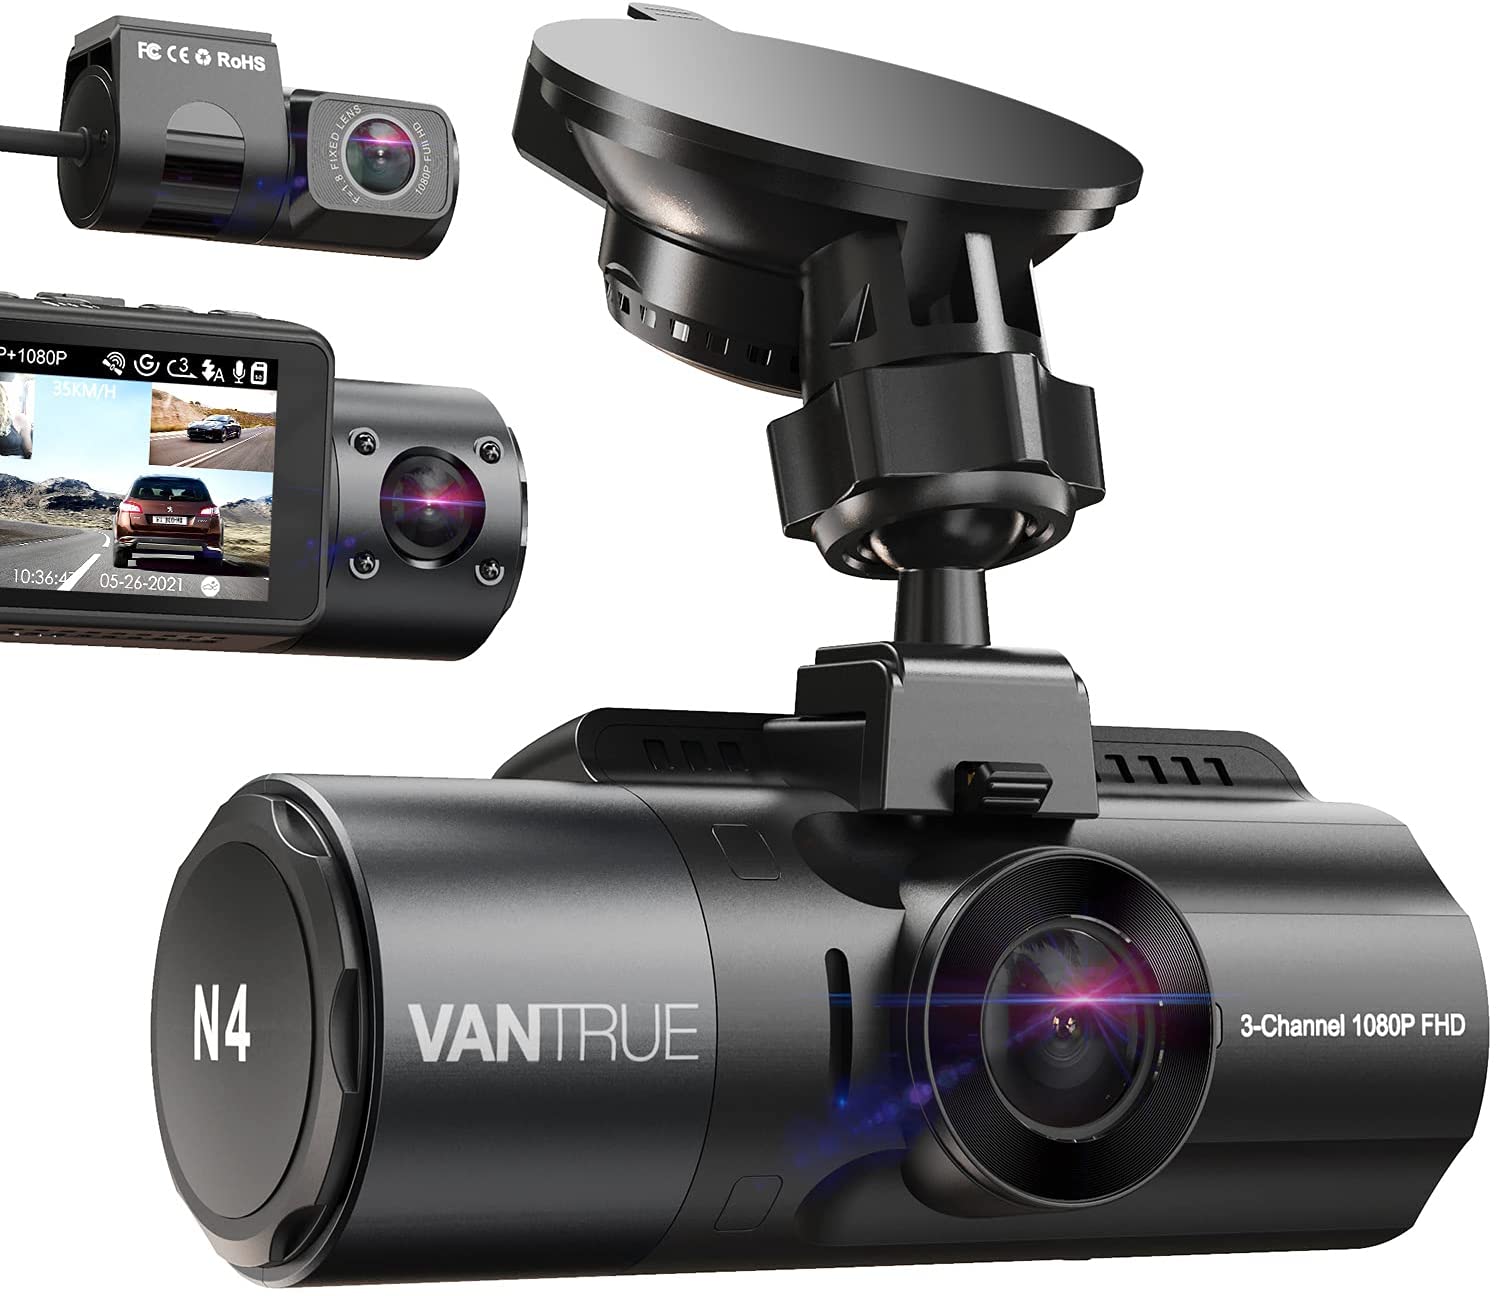 Gadgets: Nexar One dashcam shows how far technology has come to create a  second set of eyes for safety, Business